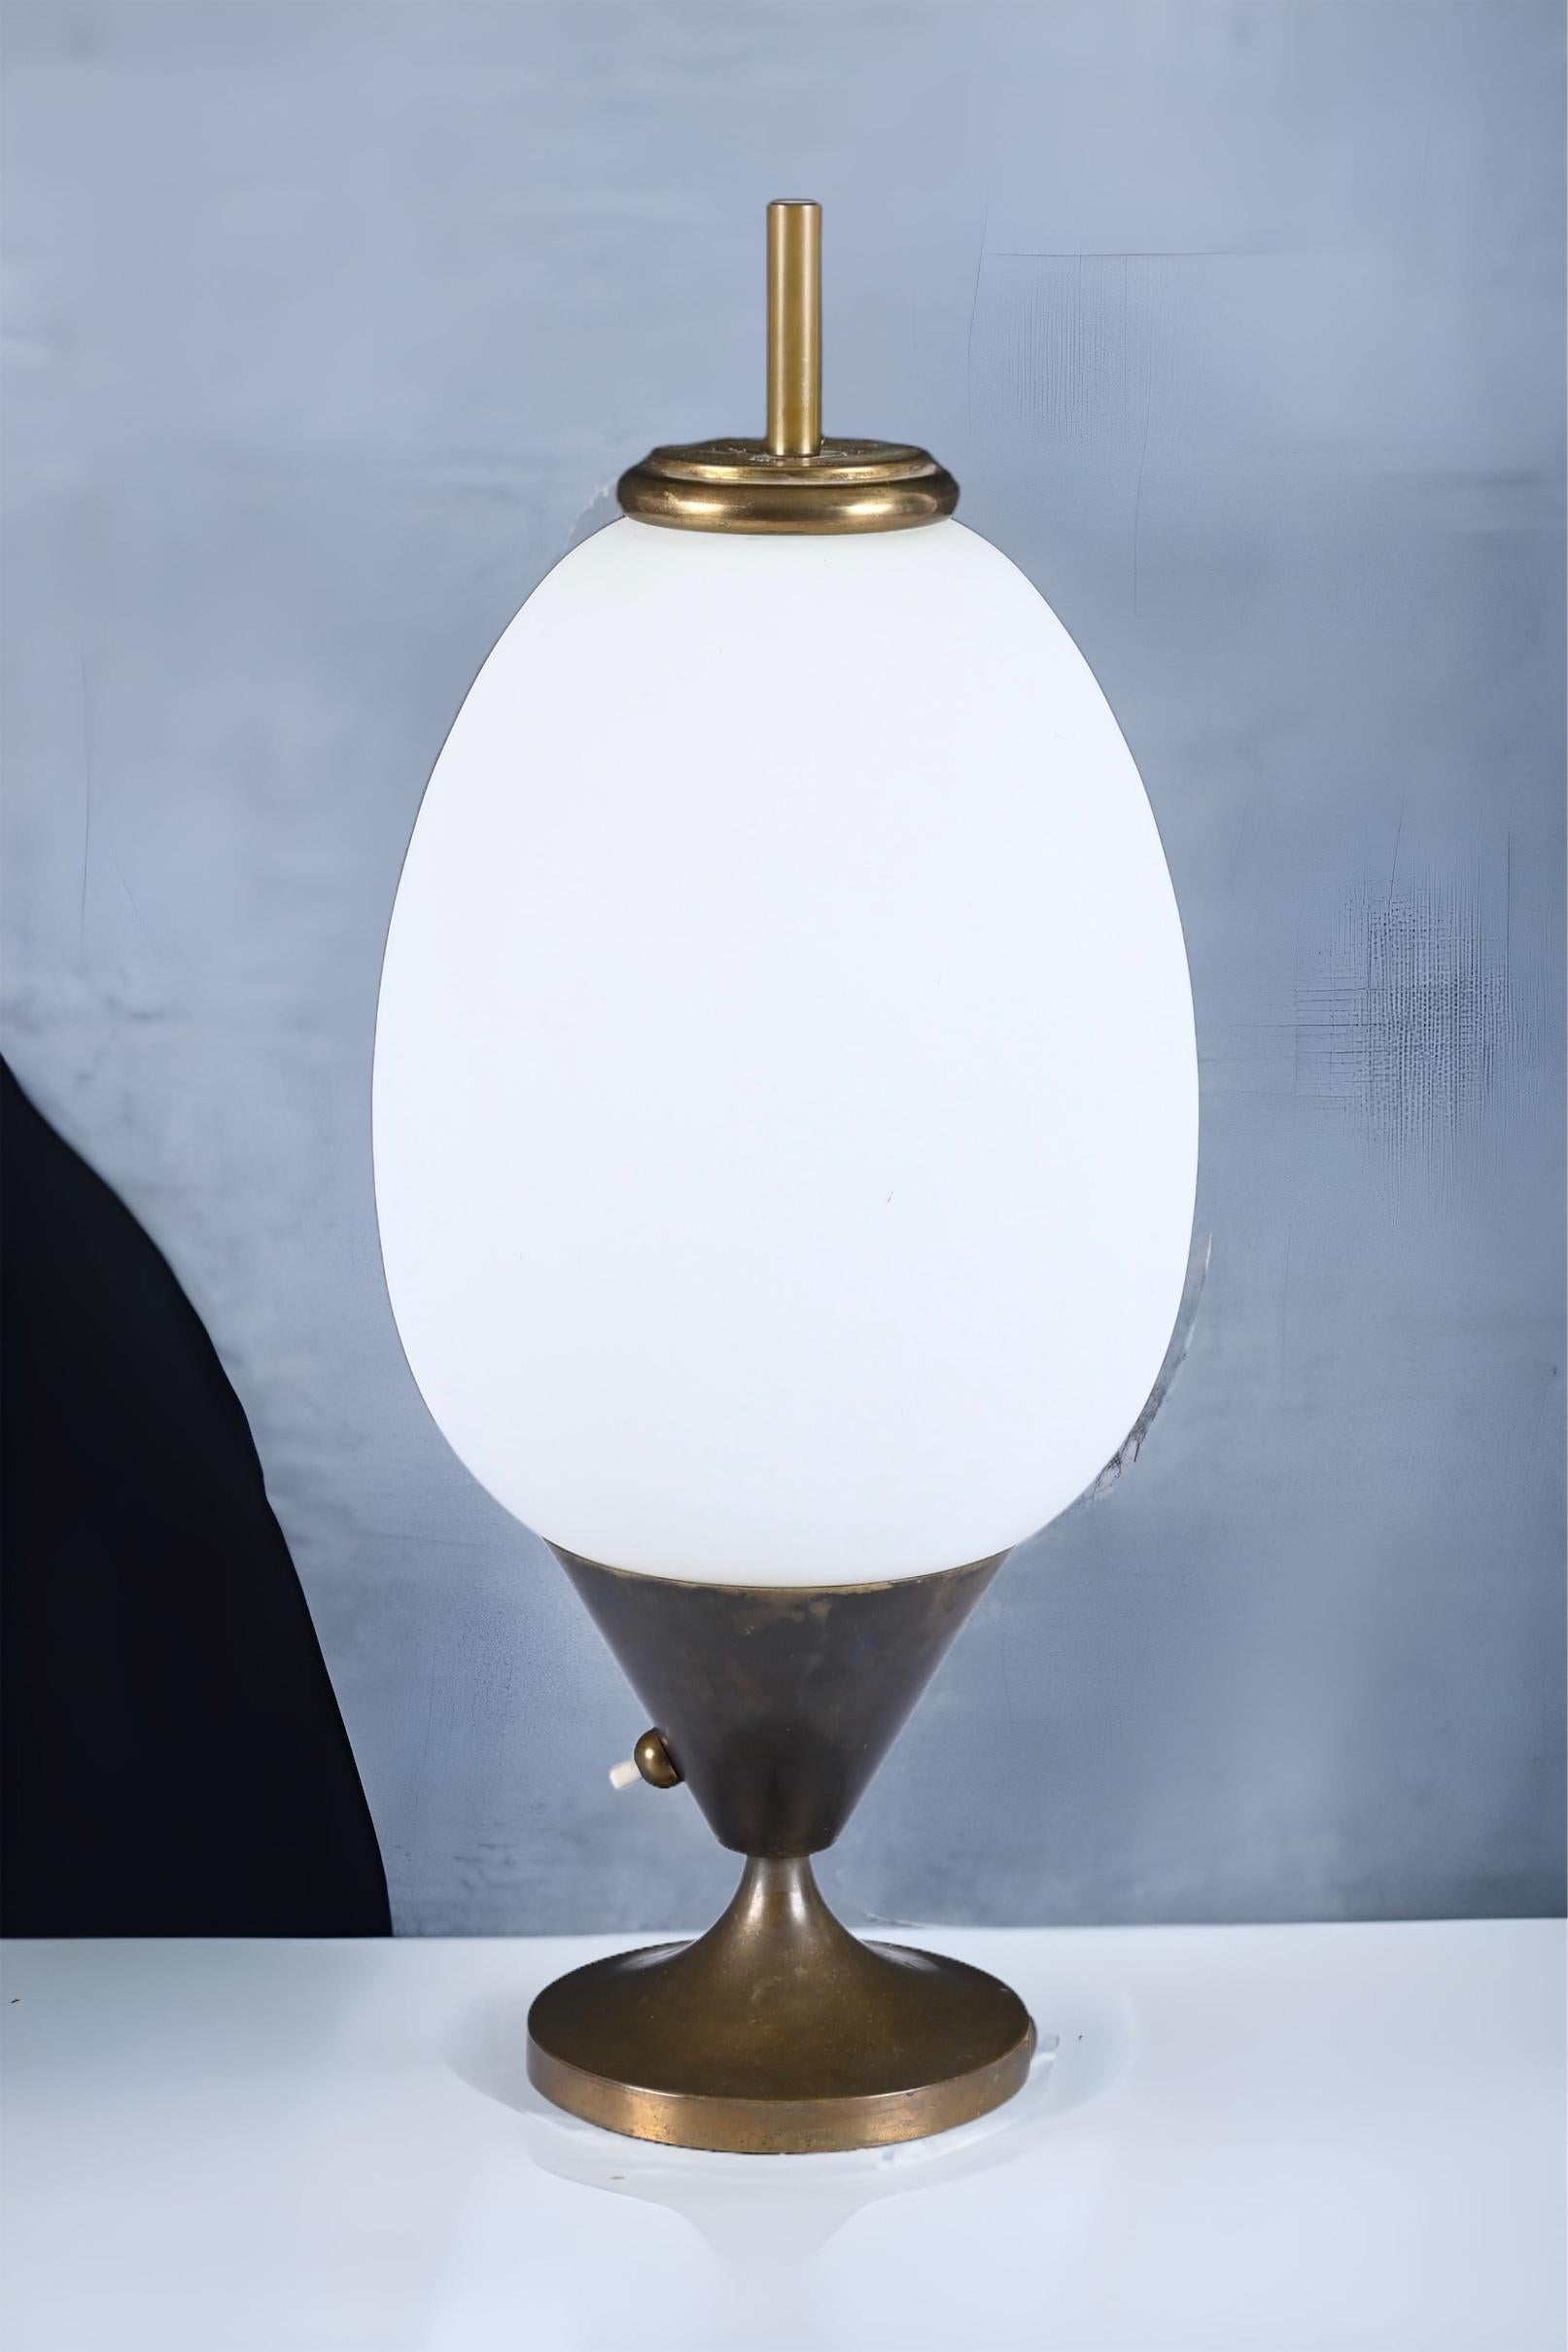 Gorgeous large egg-shaped brass table lamp and opaline glass. This unique piece was designed in Italy during the 1950s.

The lamp is simply amazing because of the iconic and delicate lines and the beautiful natural patina that amplifies it's charm